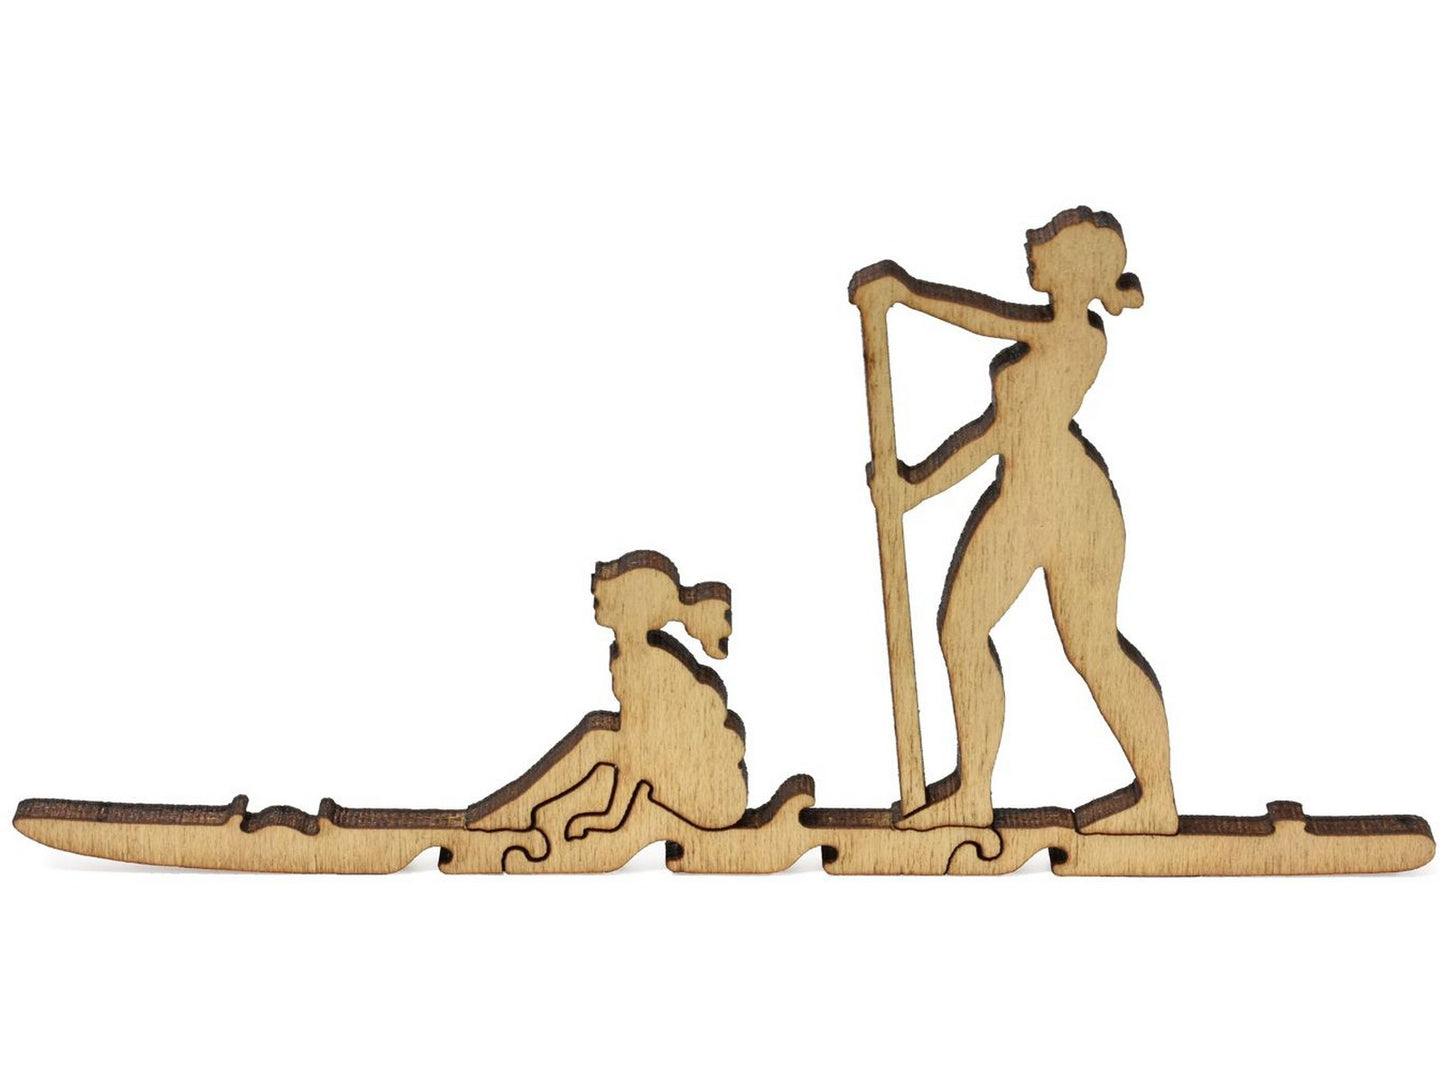 A closeup of pieces that shows two people on a paddleboard.